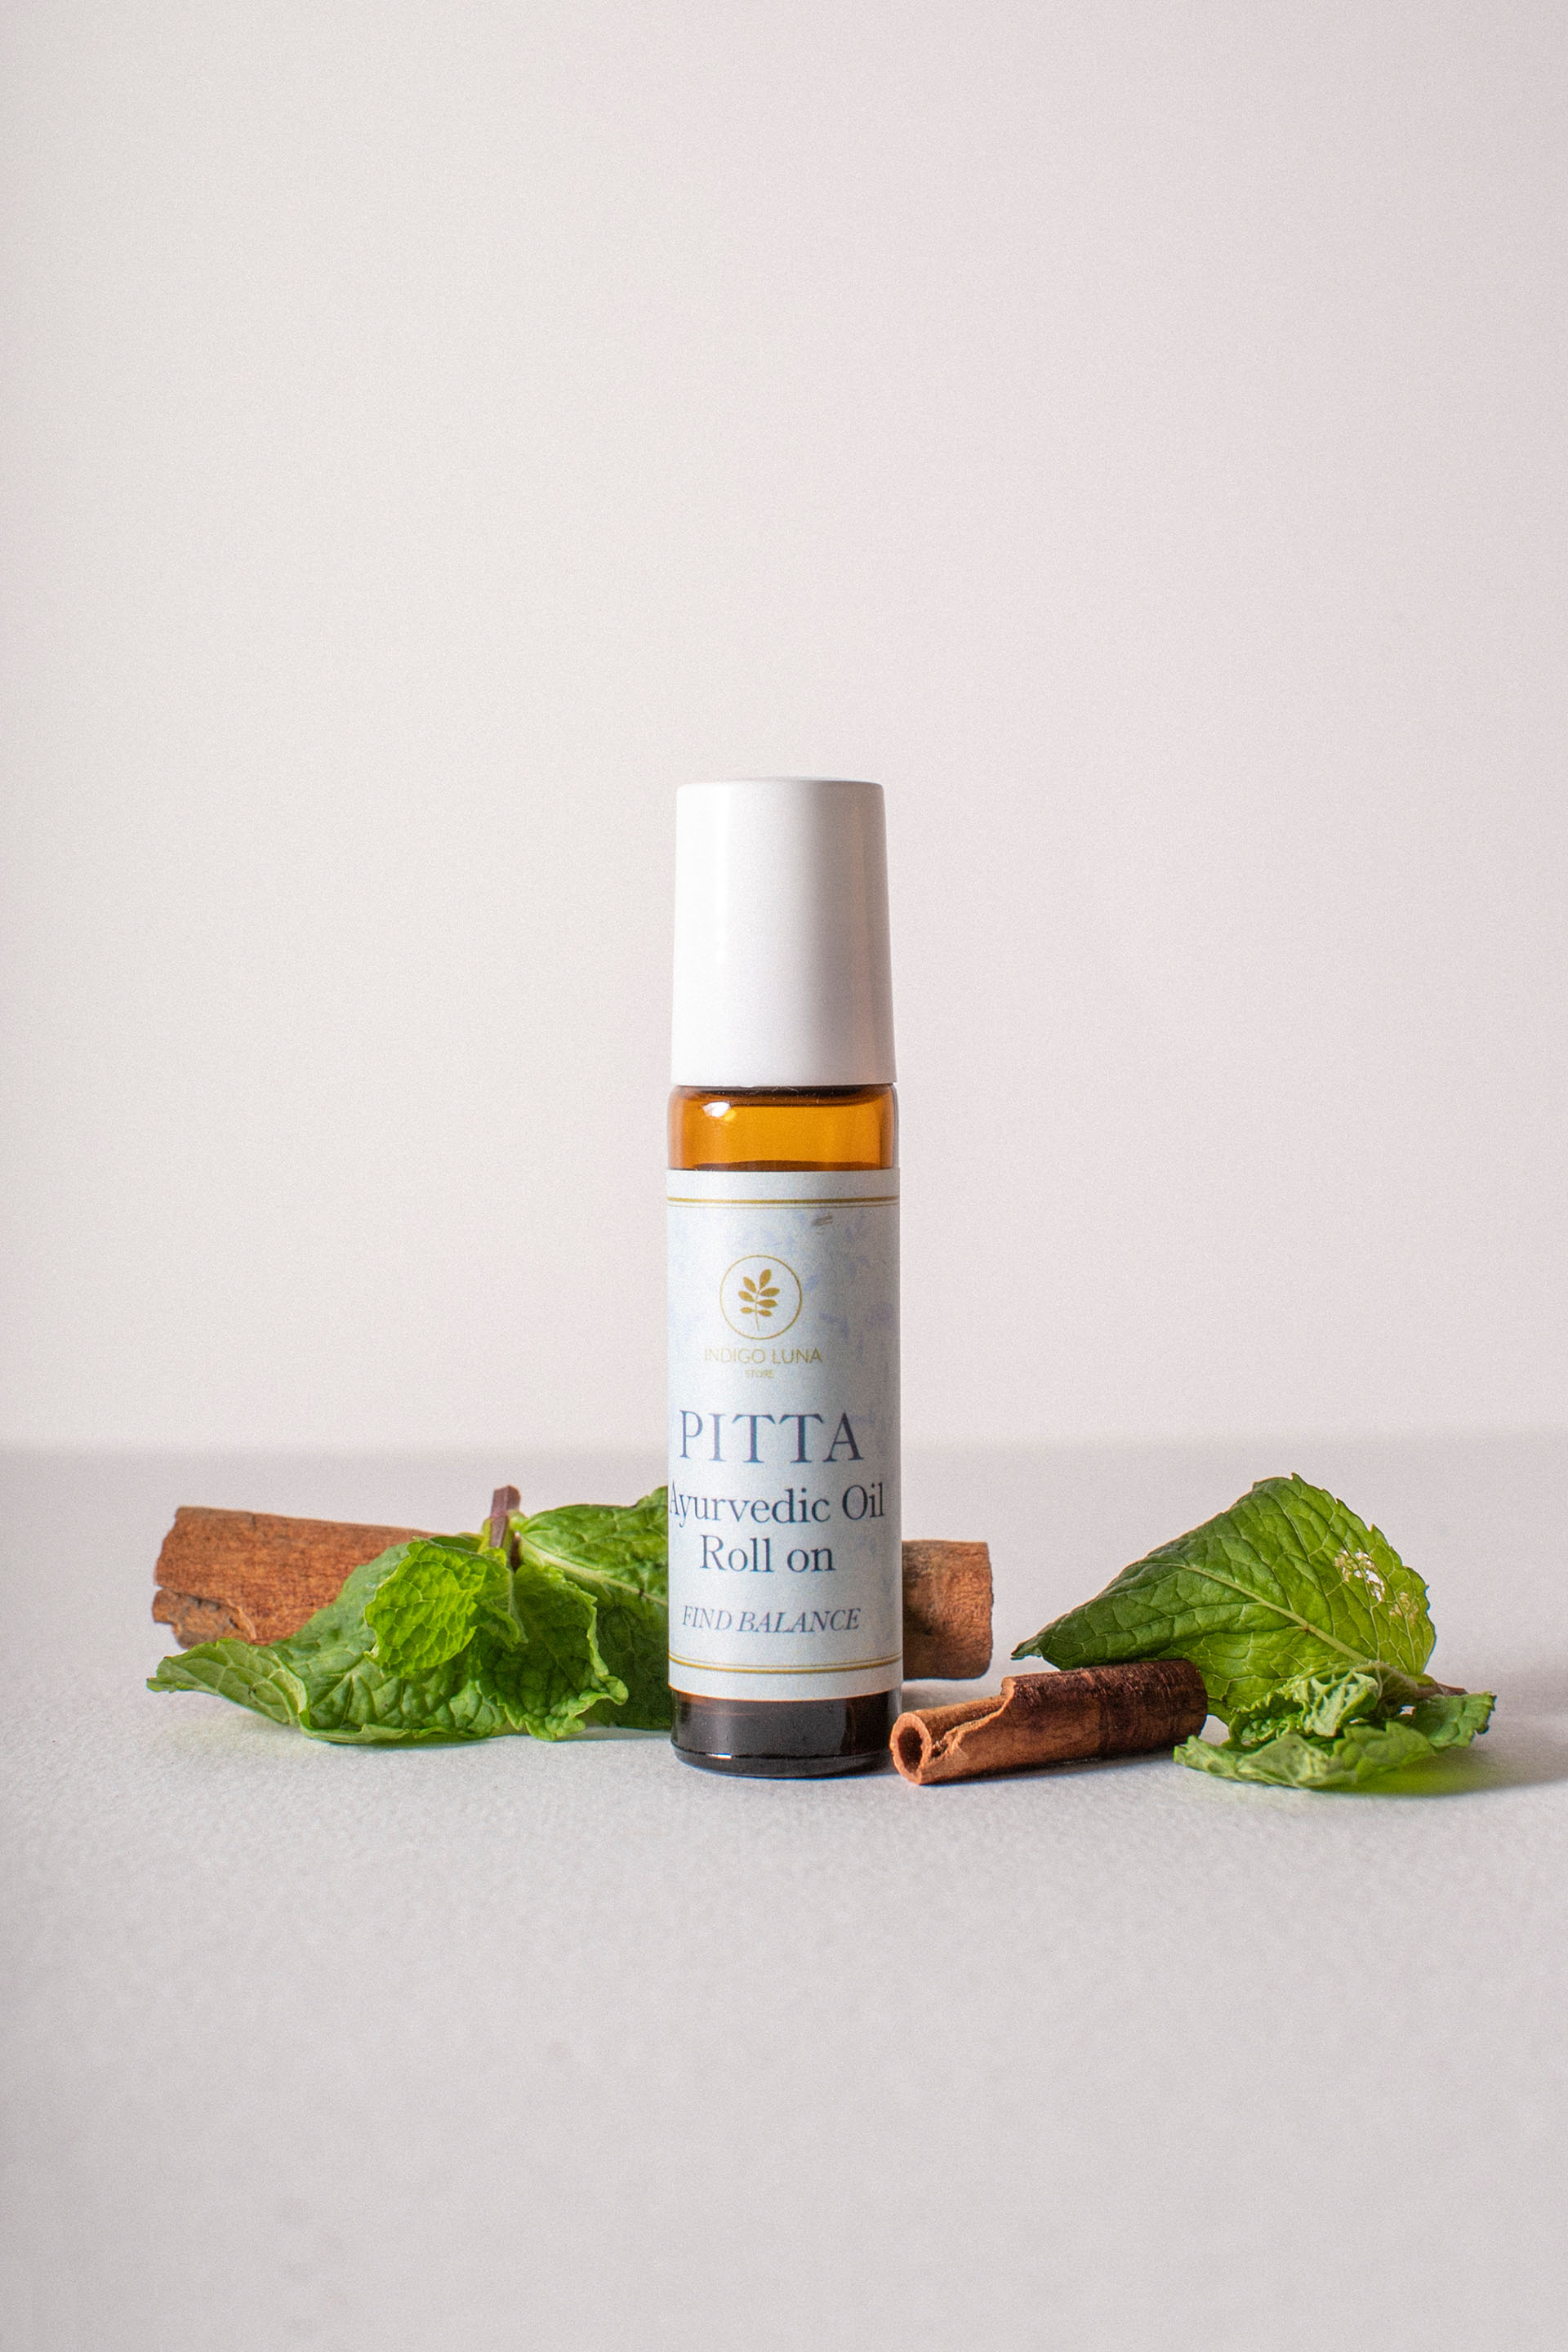 Ayurvedic essential oil for Pitta Dosha in a Roll on